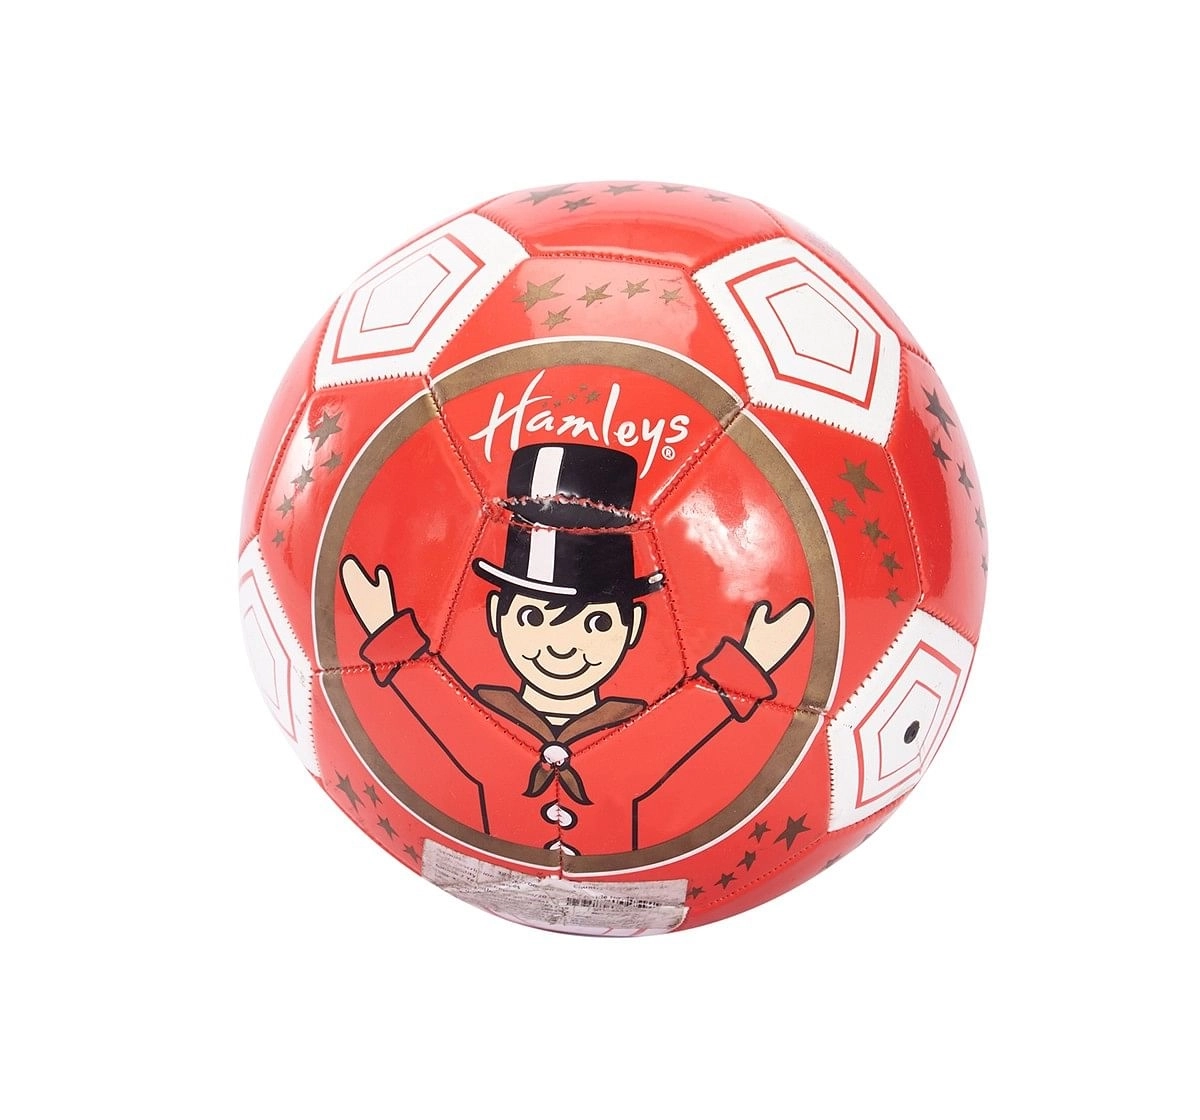 Hamleys Football Large Ball Sports & Accessories for Kids age 3Y+ (Red)